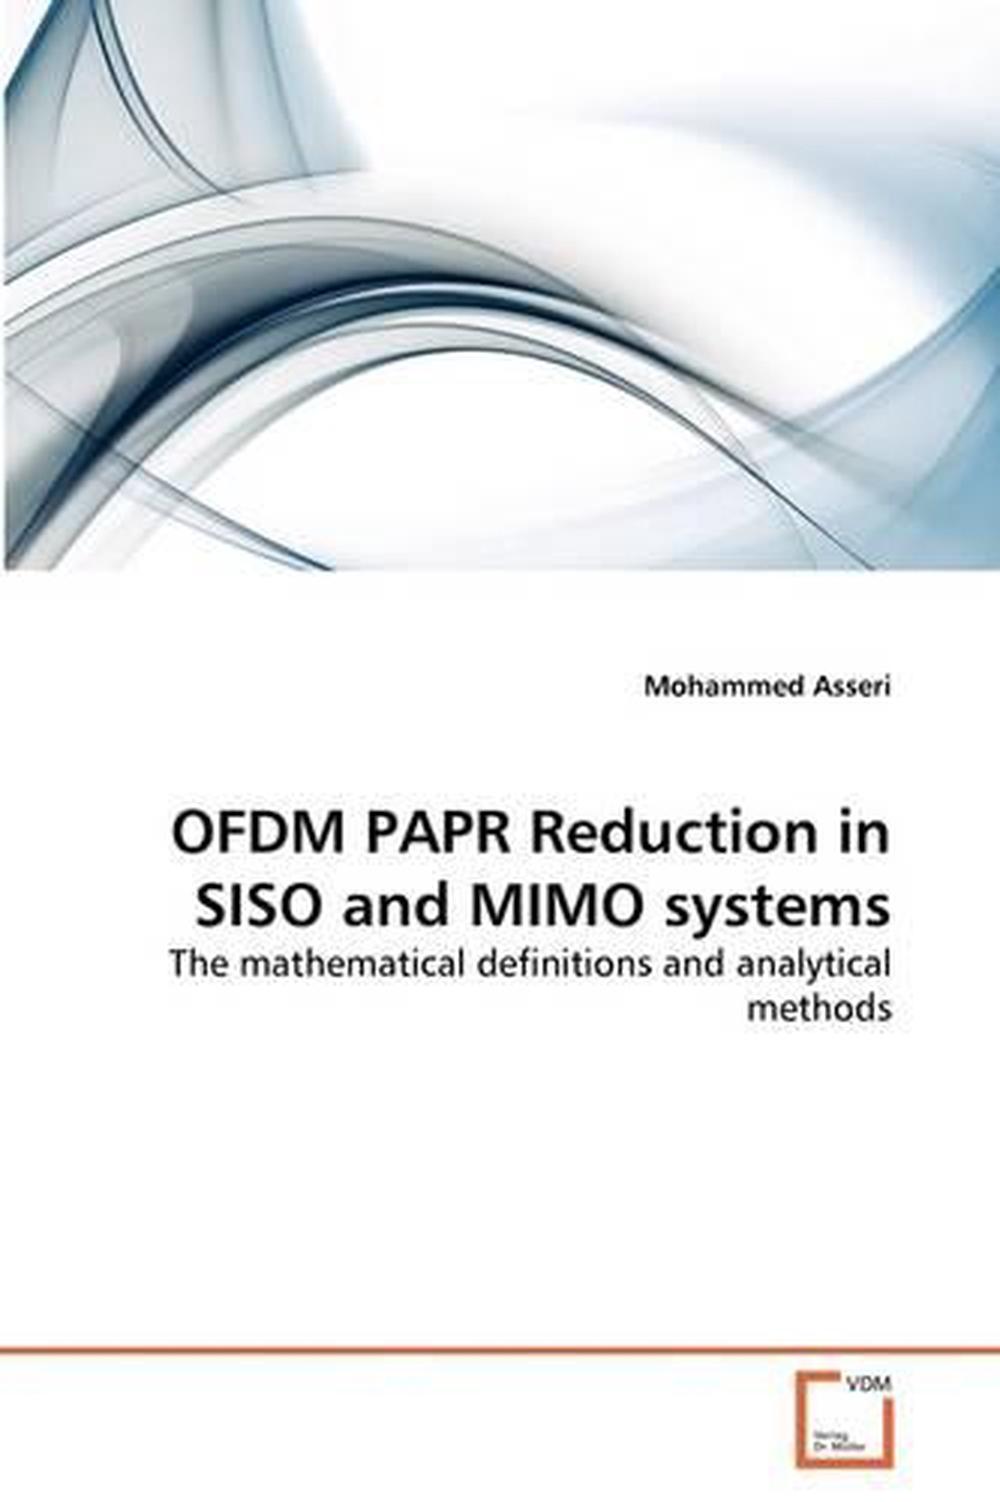 Ofdm Papr Reduction in Siso and Mimo Systems: The mathematical definitions and a - Photo 1/1